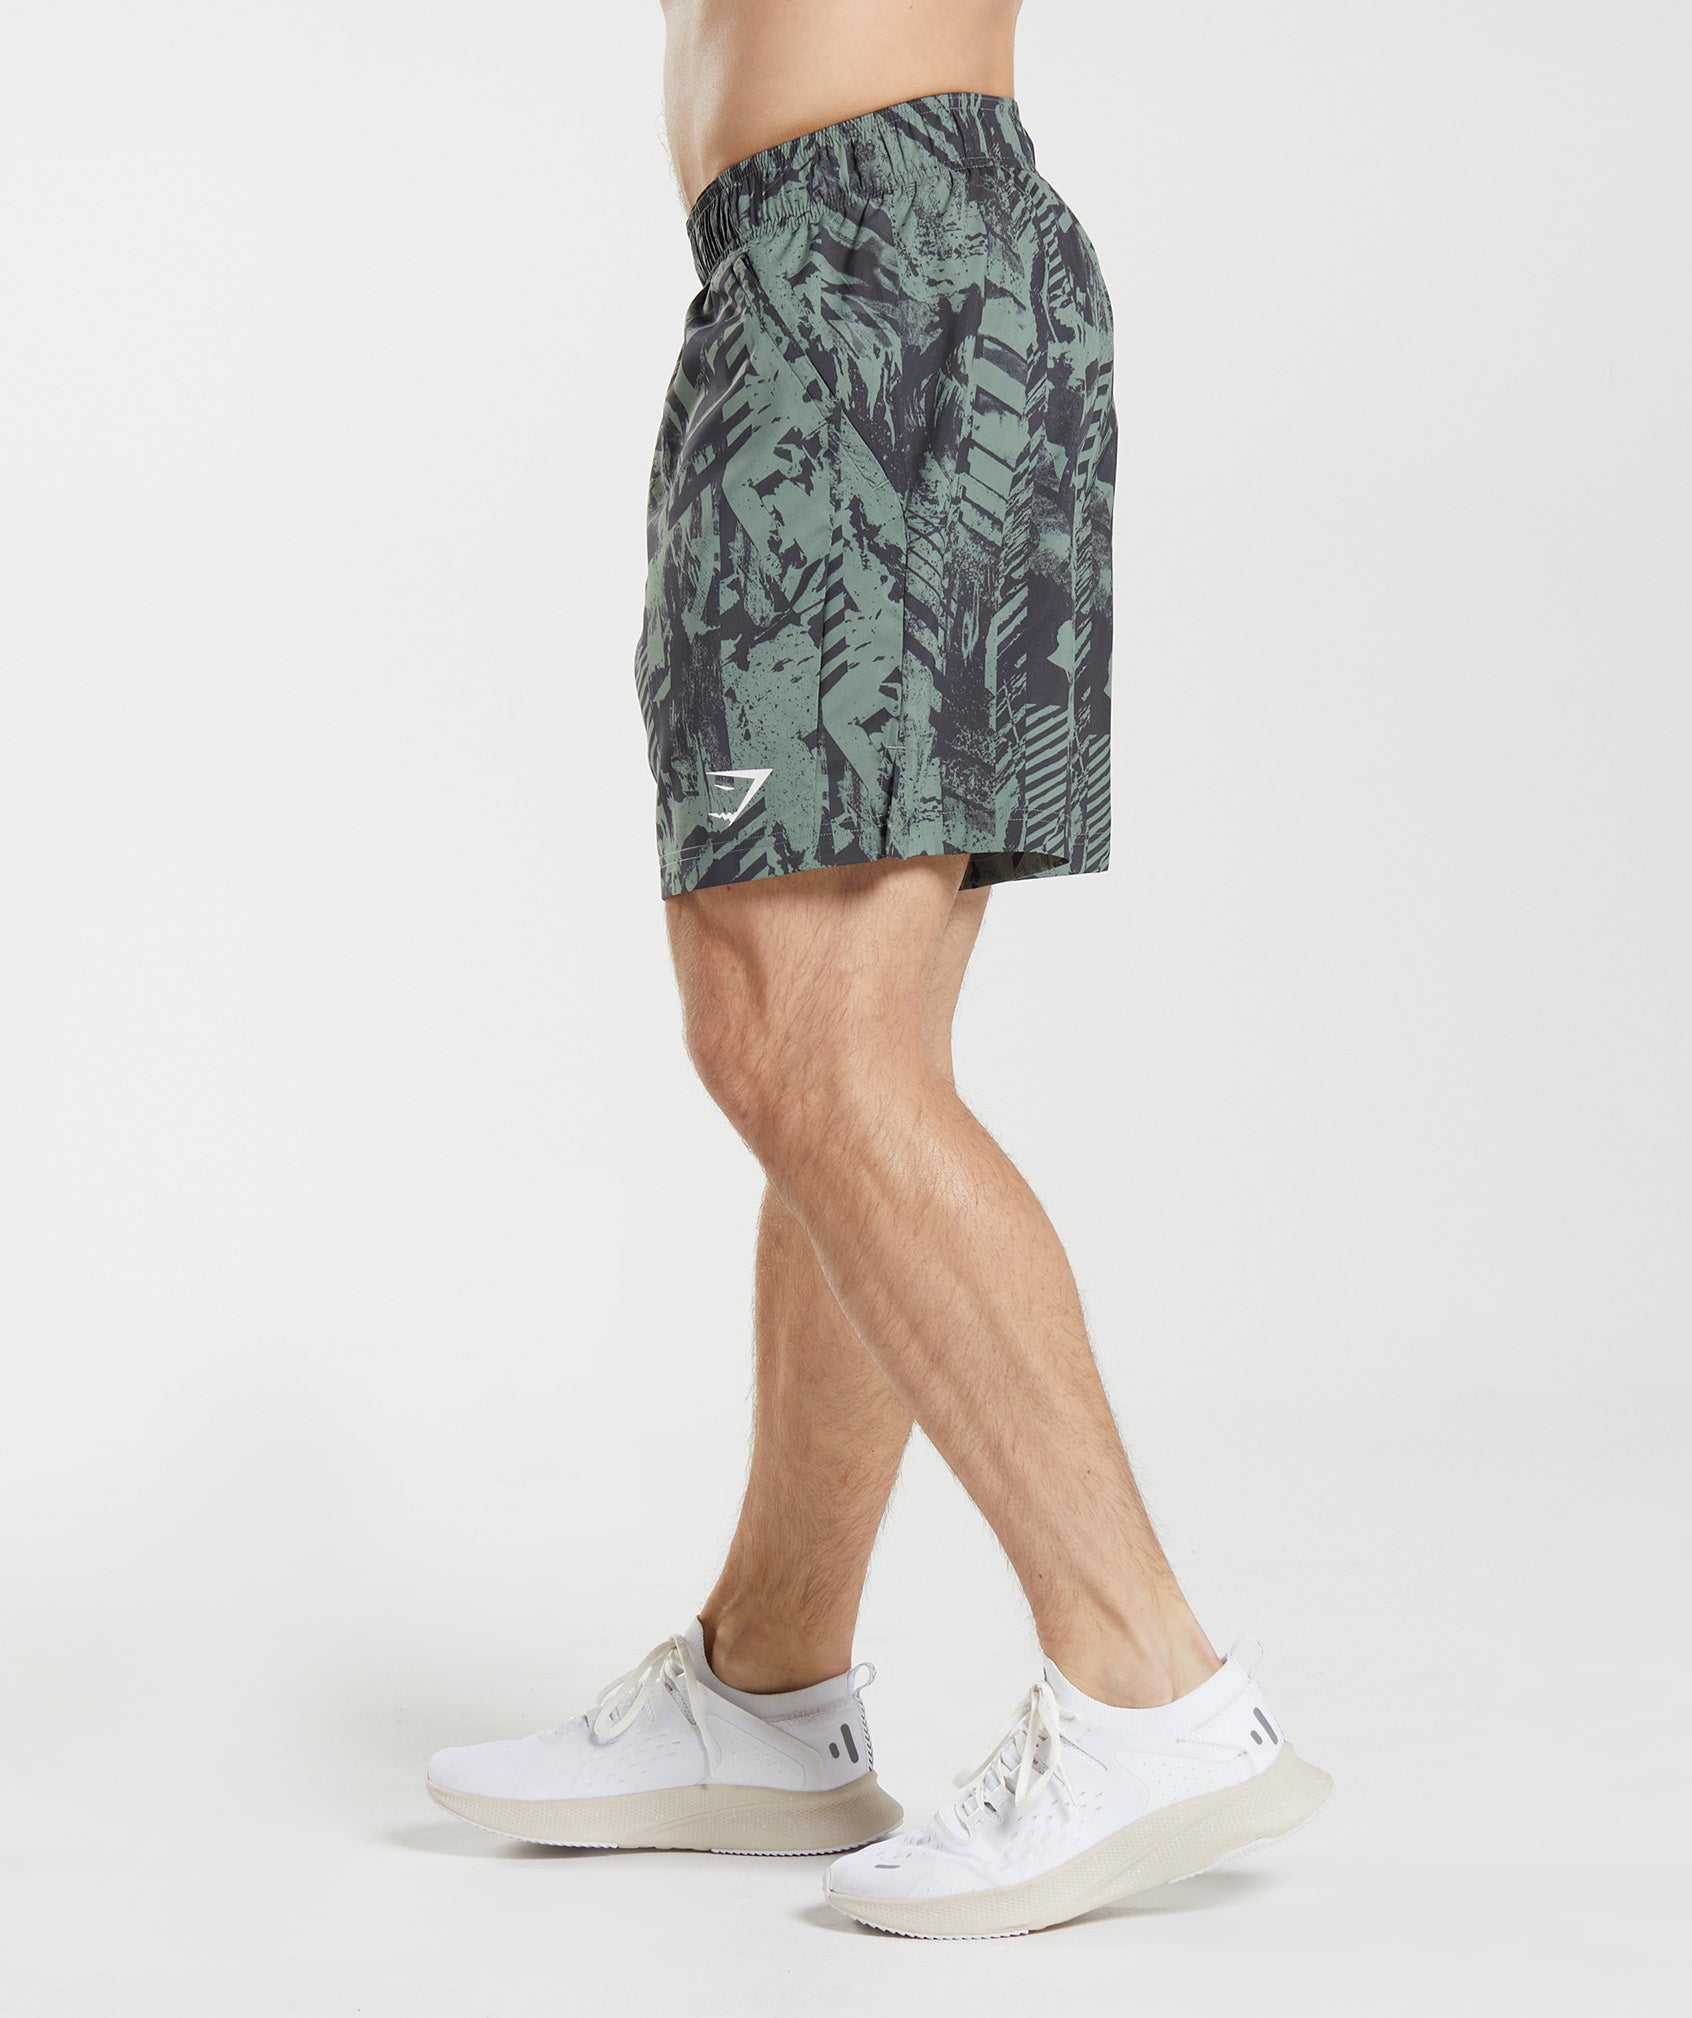 Sport 7" Shorts in Willow Green Print